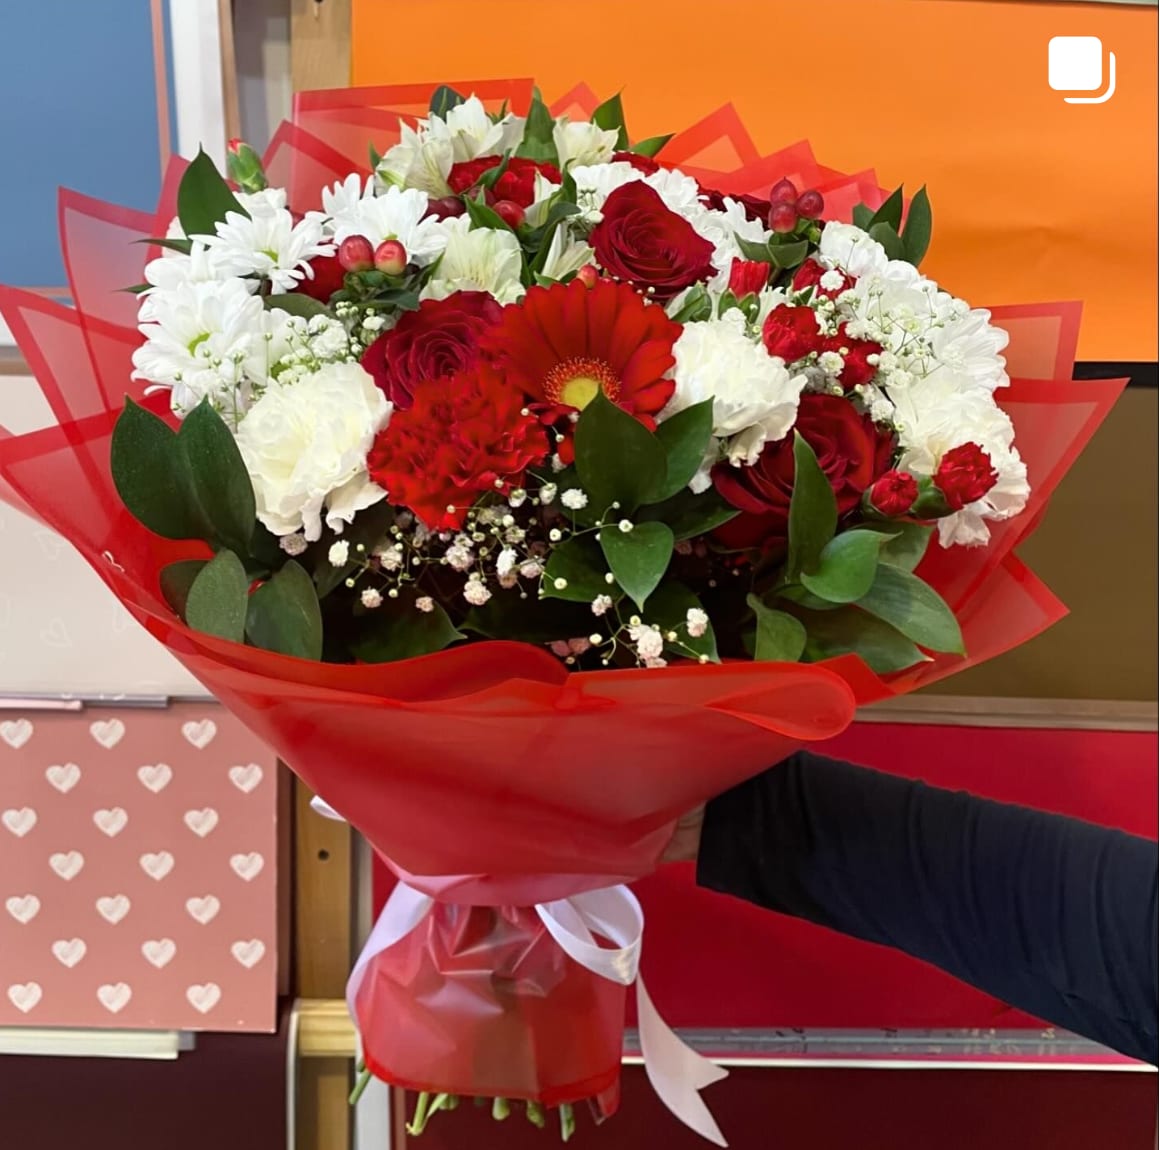 Deluxe Red and White Bouquet - Red and white mixed blooms in a hand bouquet